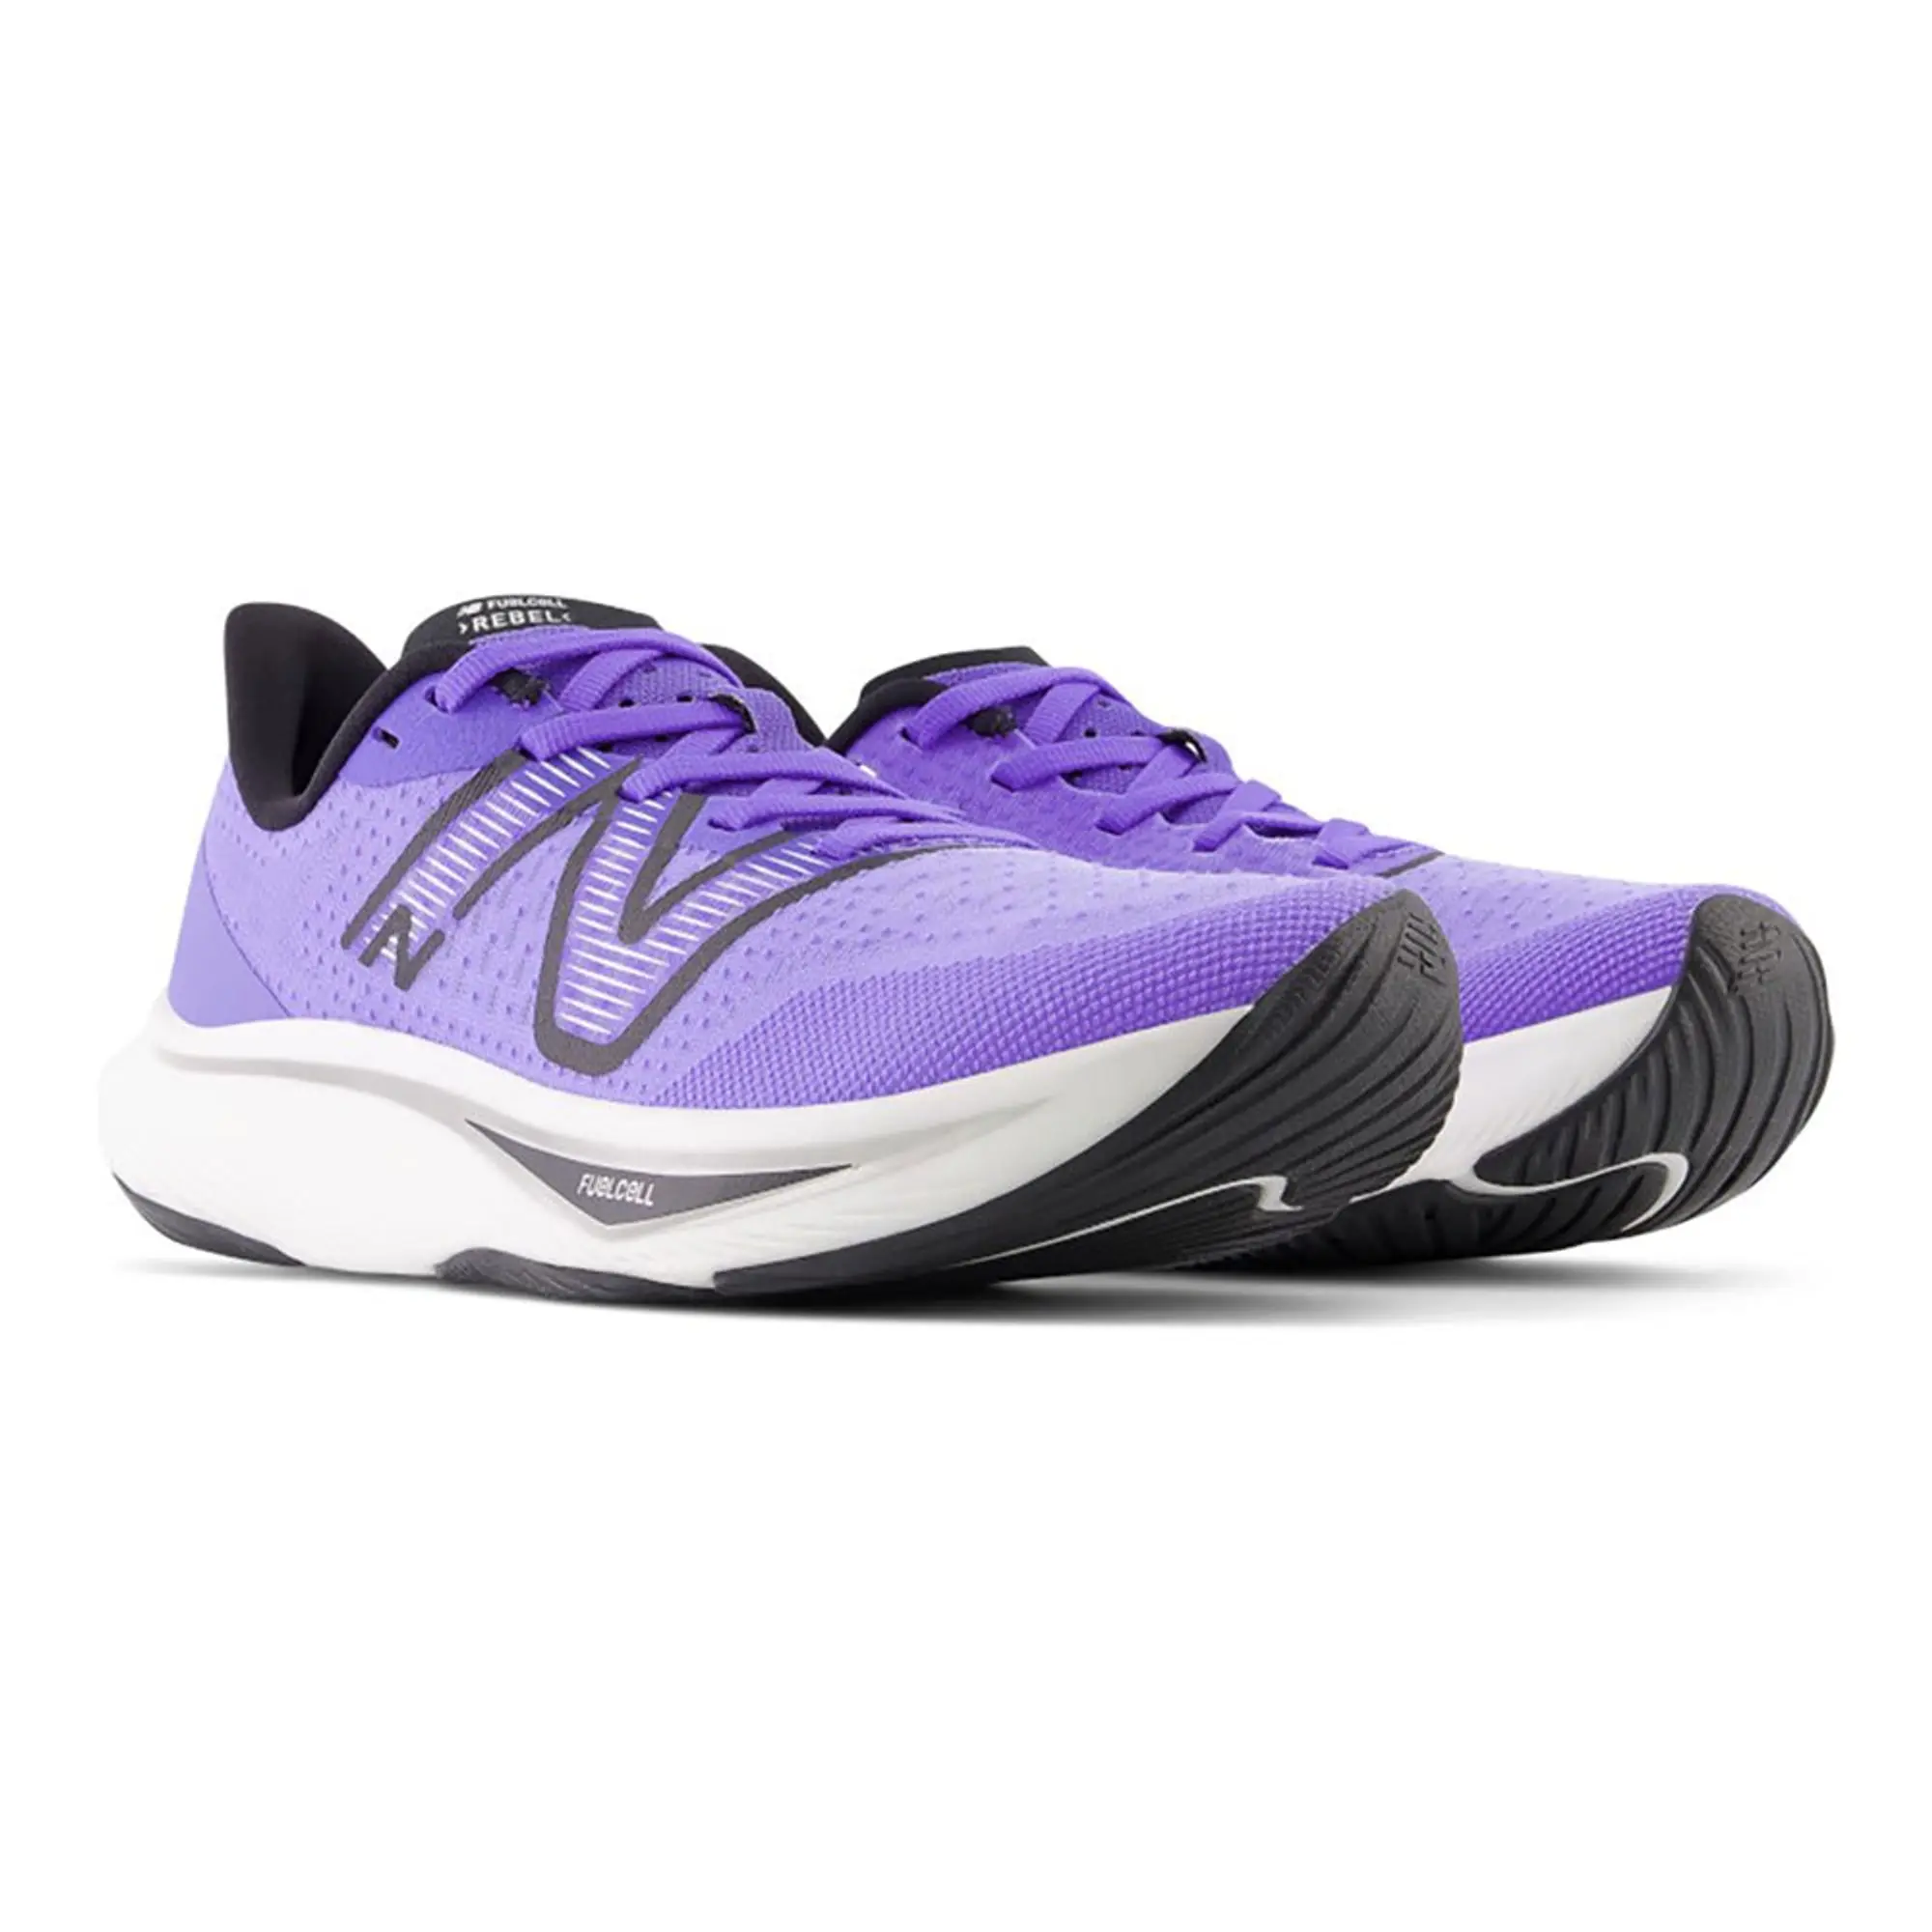 New Balance Fuelcell Rebel V3 Running Shoes  - Purple